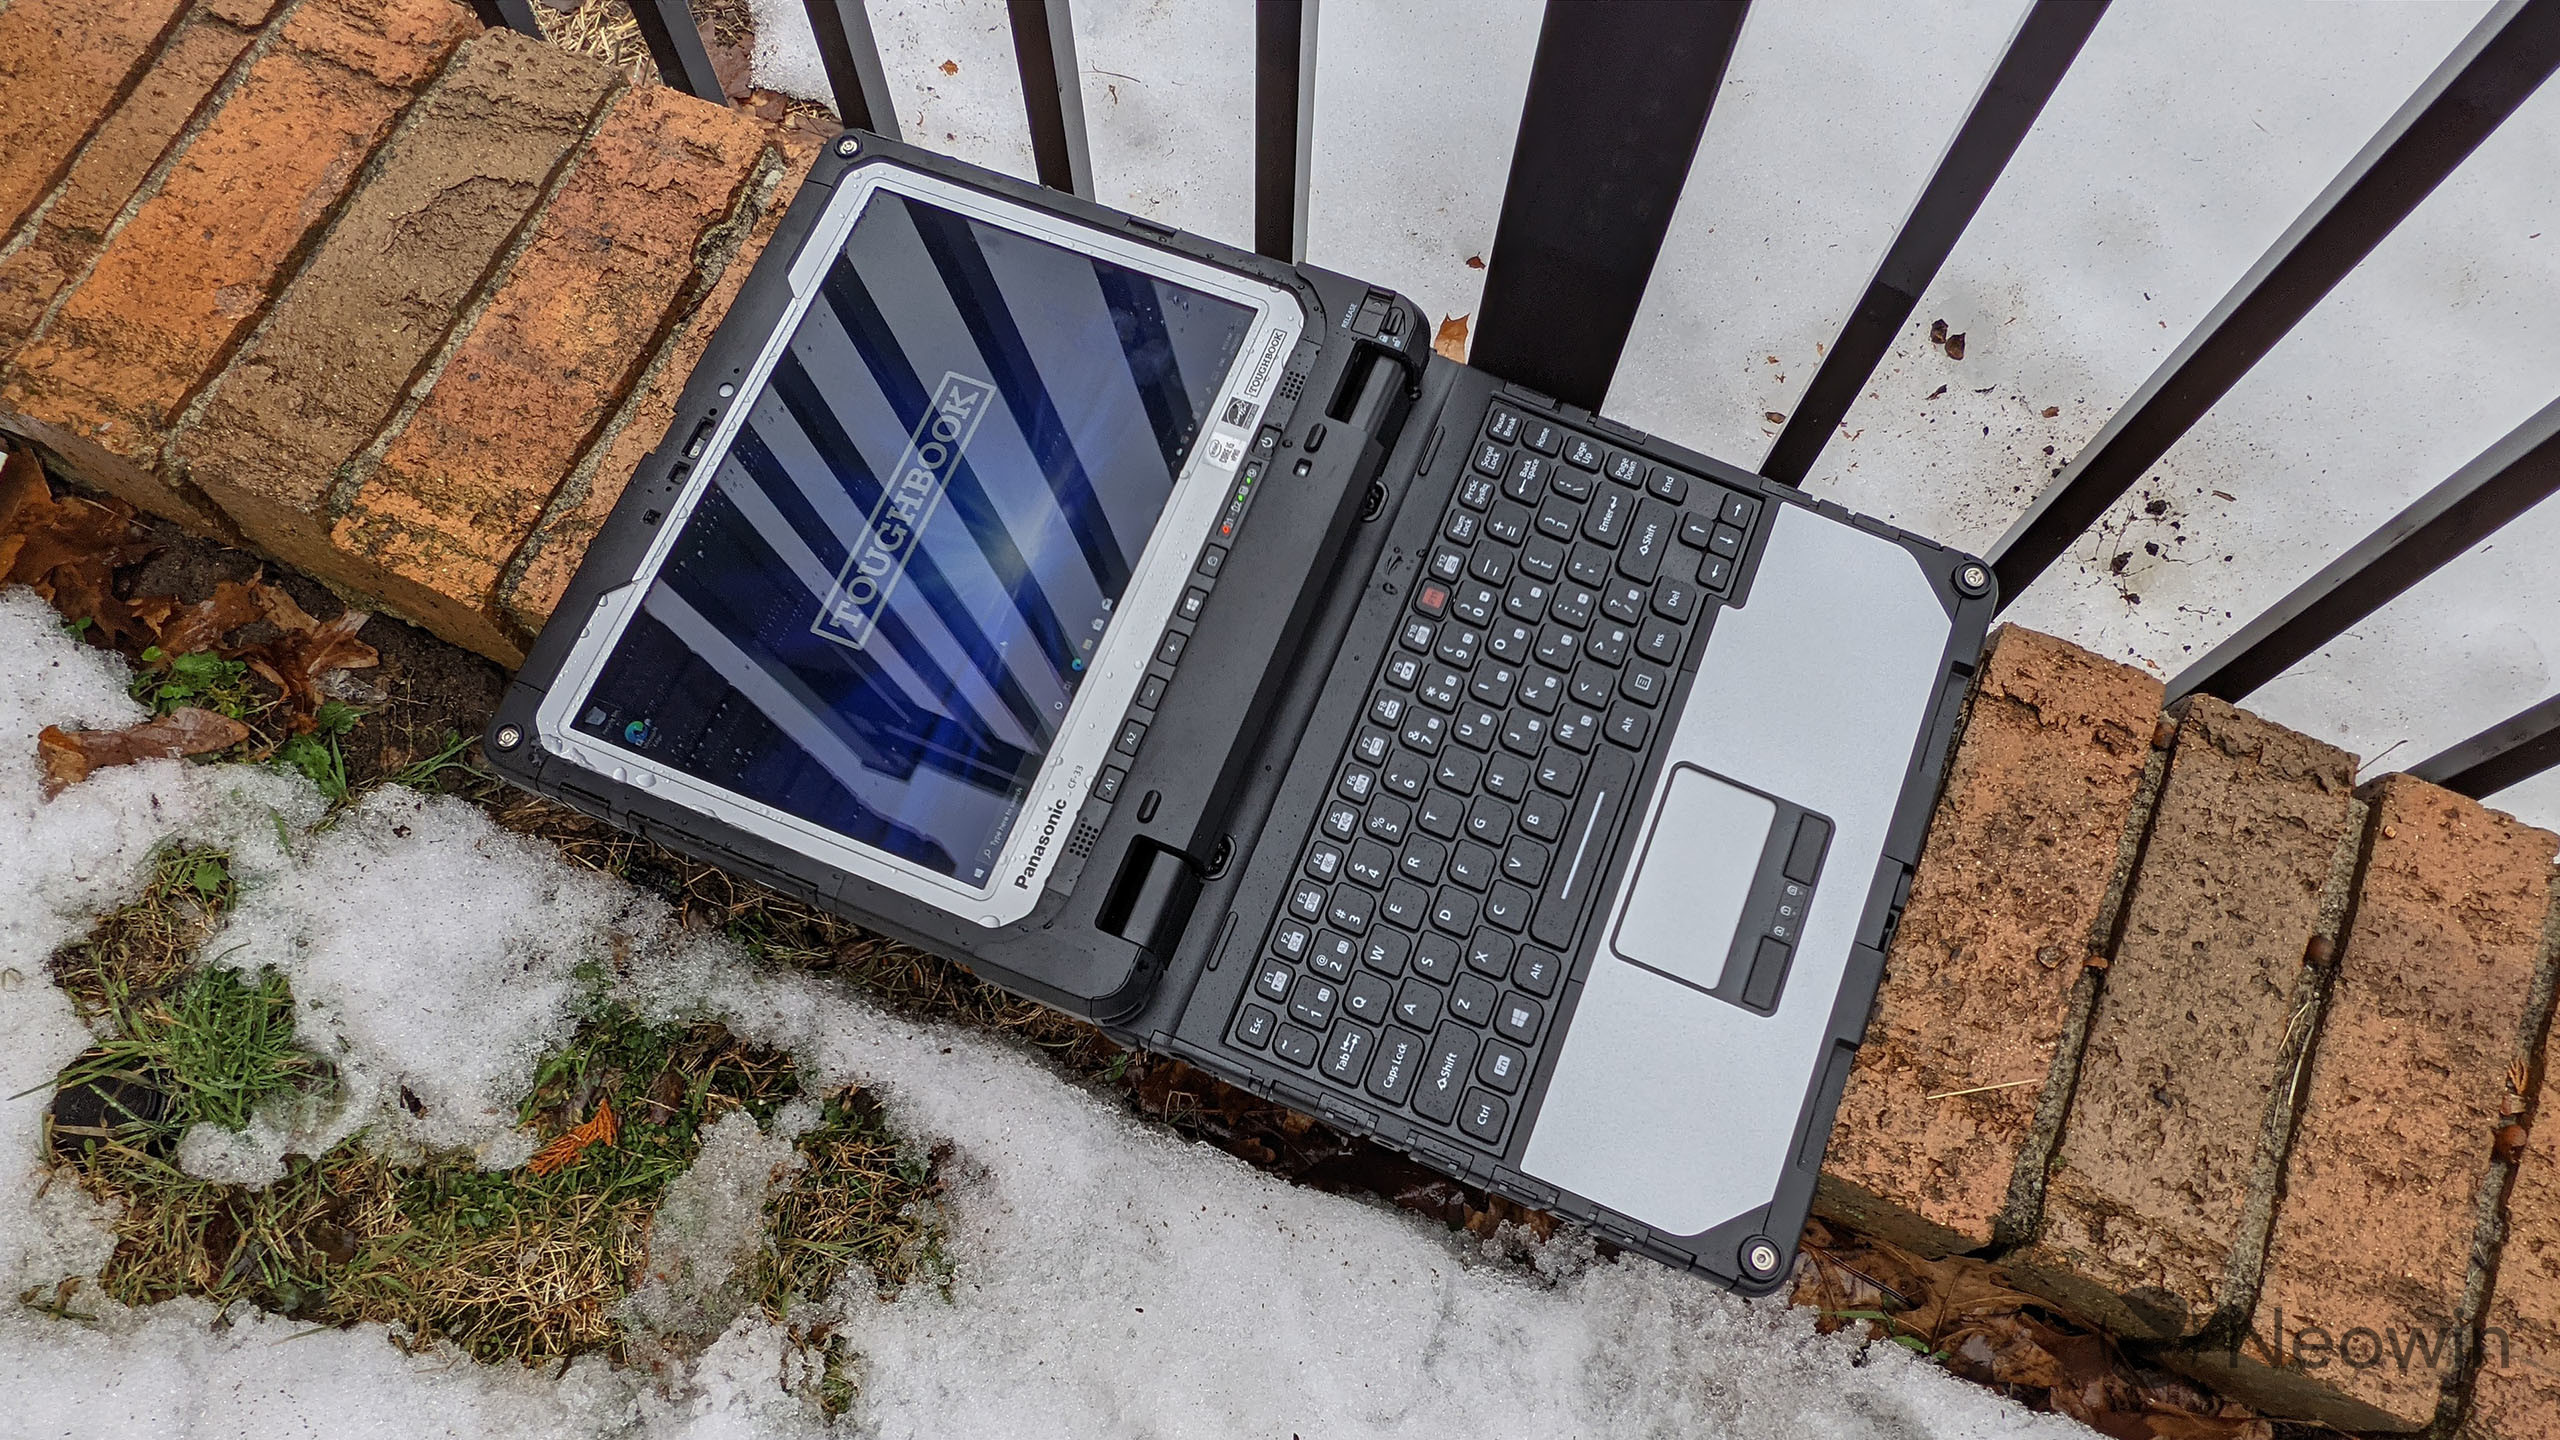 Panasonic TOUGHBOOK 33 review: A Surface Book you can beat the